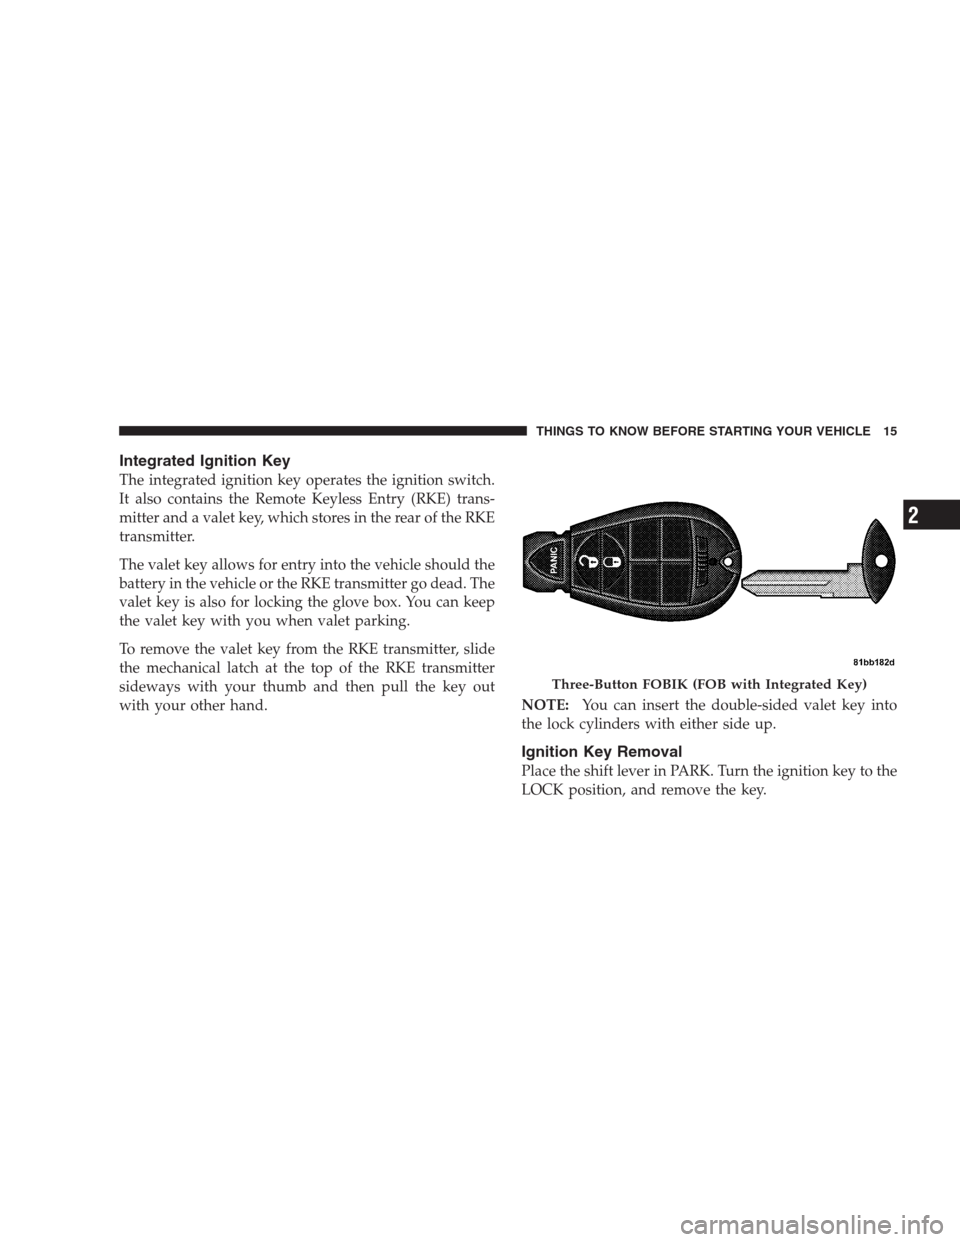 JEEP COMMANDER 2009 1.G Owners Manual Integrated Ignition Key
The integrated ignition key operates the ignition switch.
It also contains the Remote Keyless Entry (RKE) trans-
mitter and a valet key, which stores in the rear of the RKE
tra